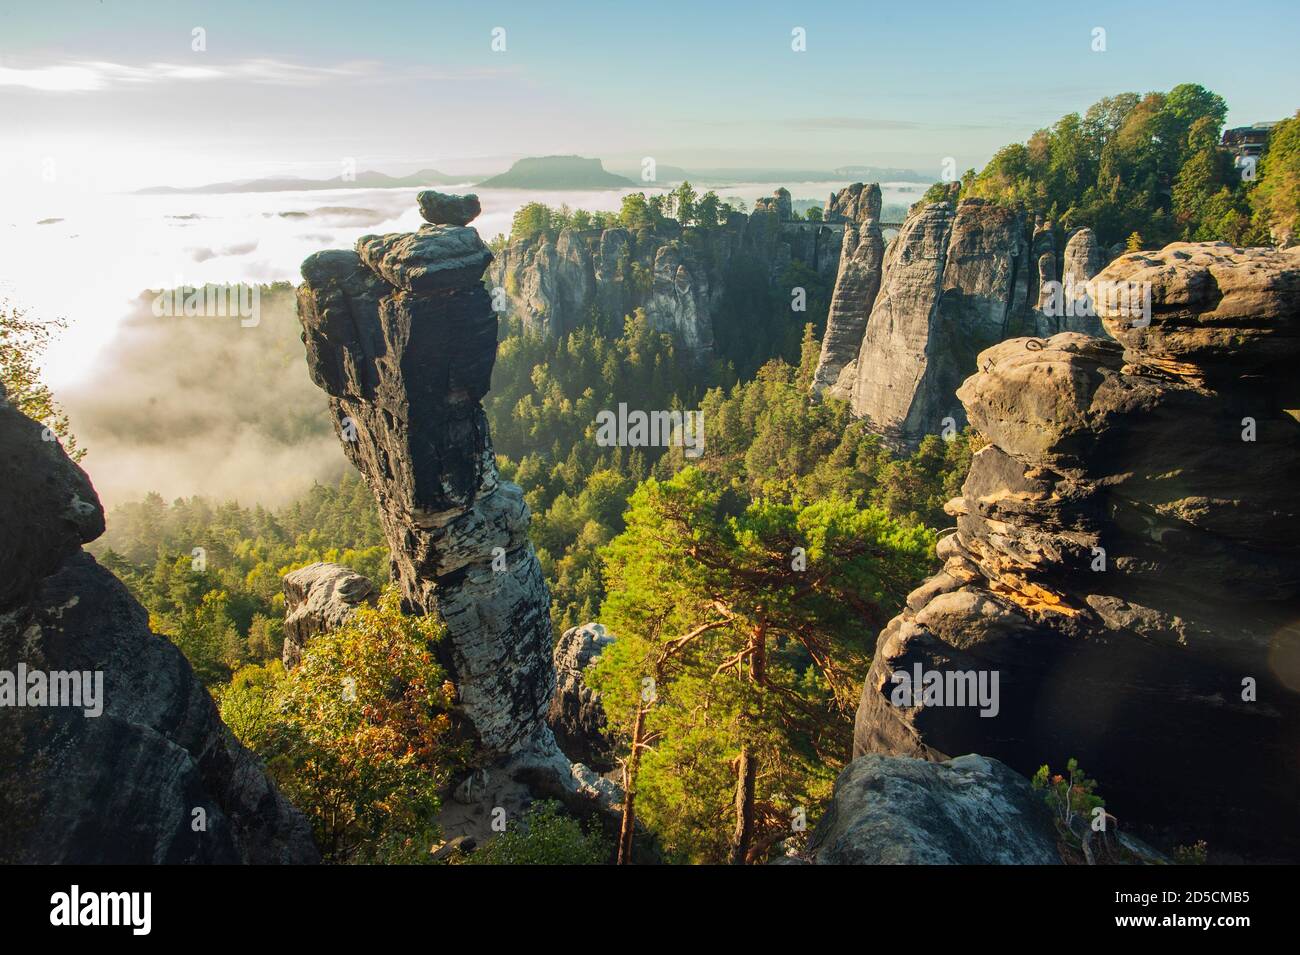 Picuresque  viev over the wehlground to the Bastei bridge with fog in the valley during the sunrise. The distinctive Wehl needle in the foreground. Stock Photo